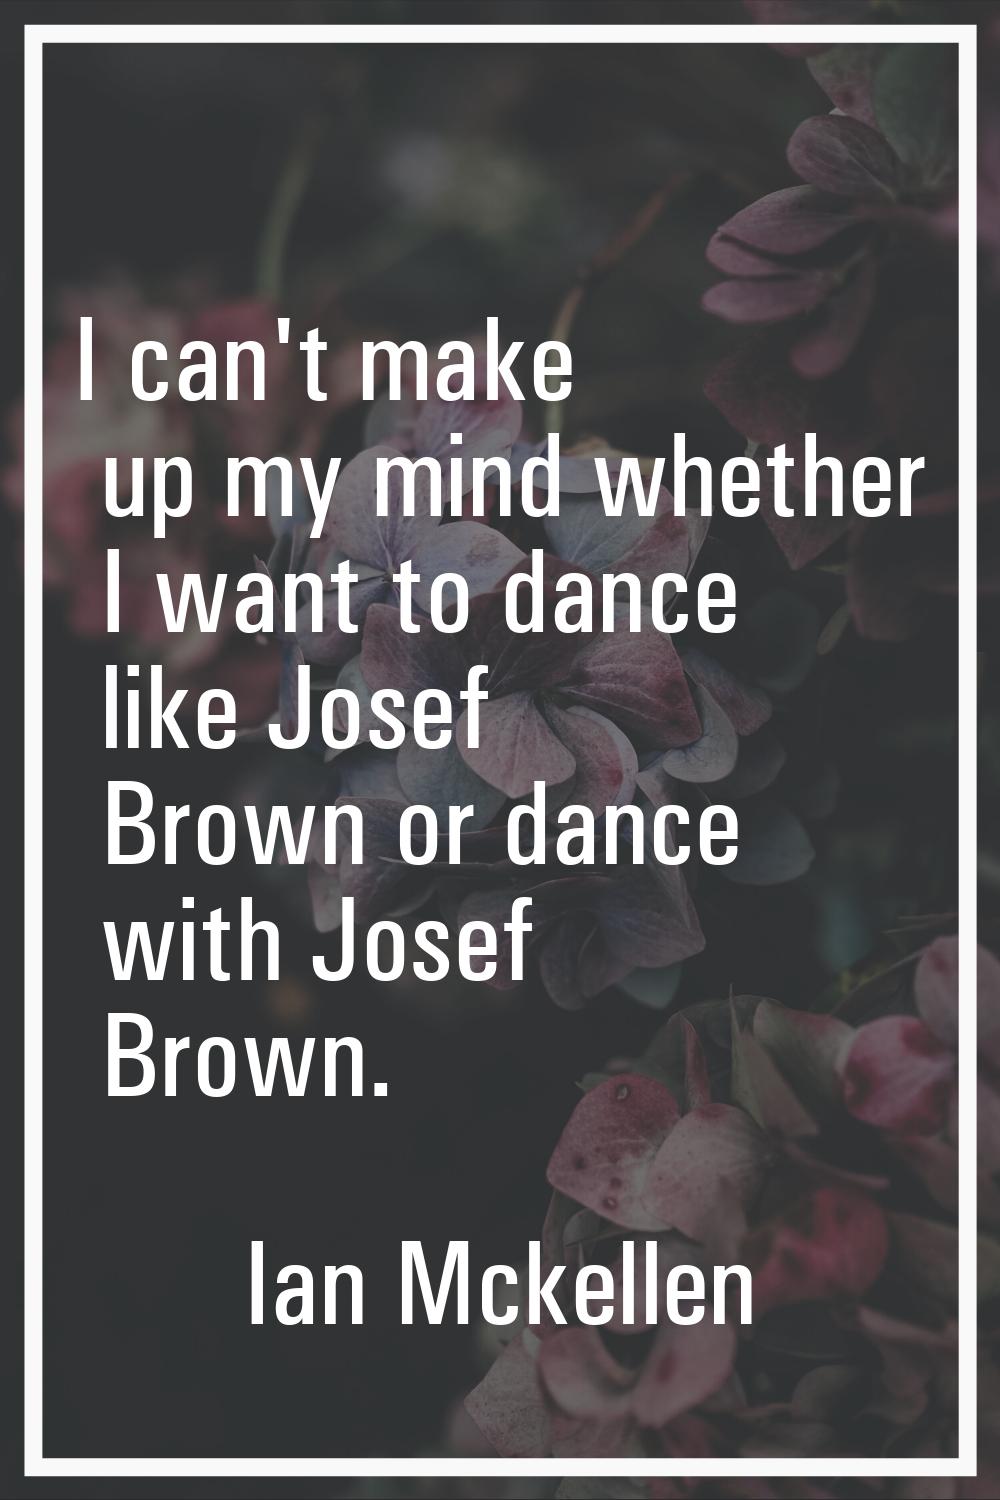 I can't make up my mind whether I want to dance like Josef Brown or dance with Josef Brown.